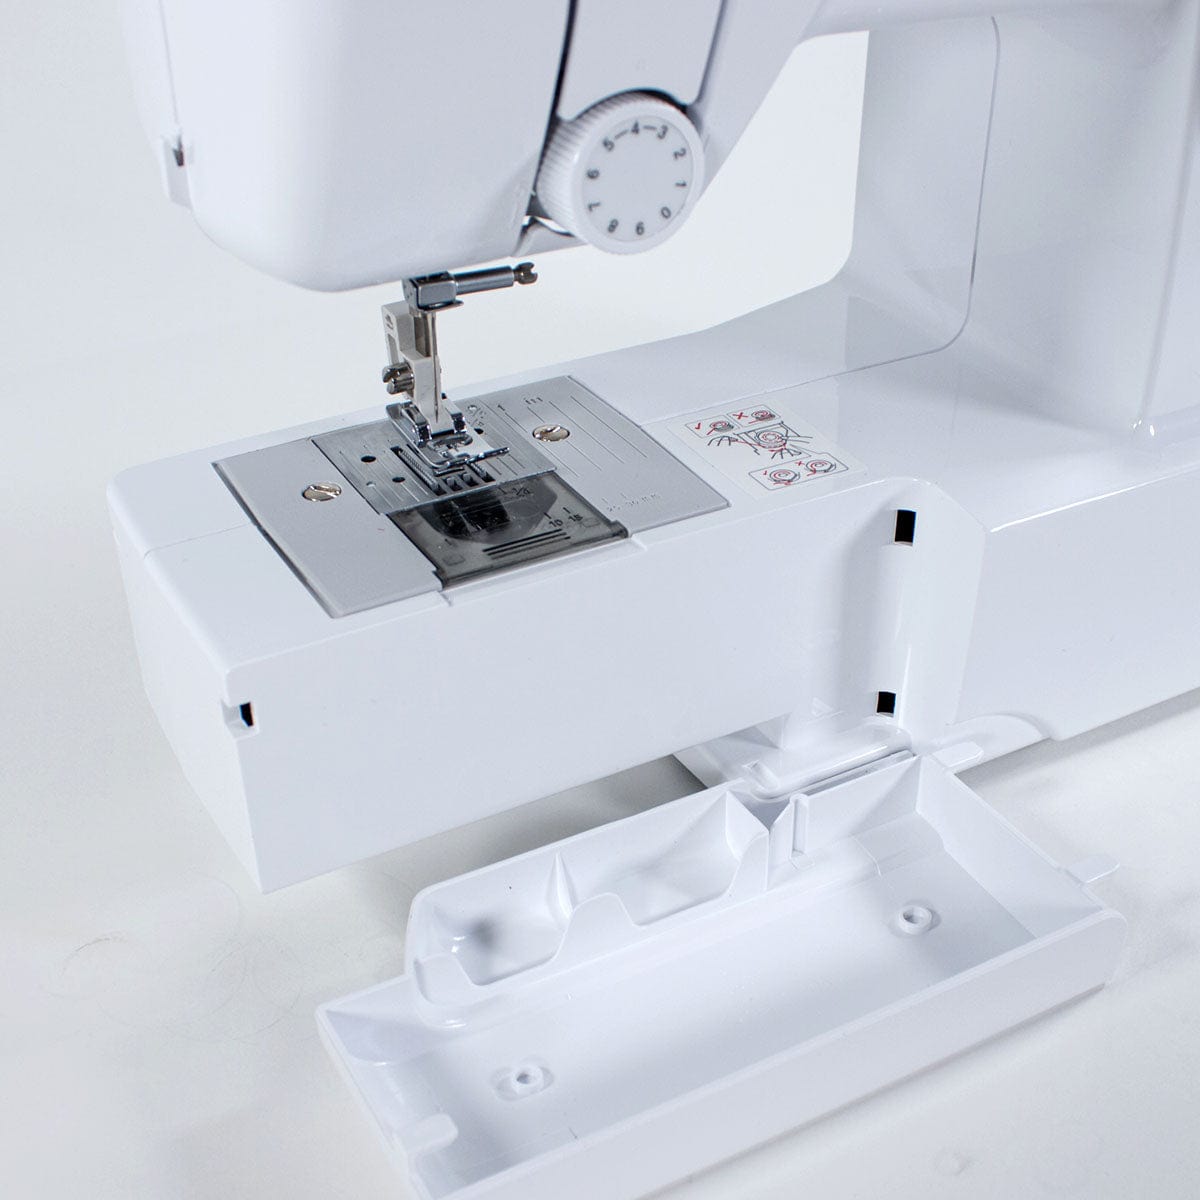 Brother L14S Sewing Machine